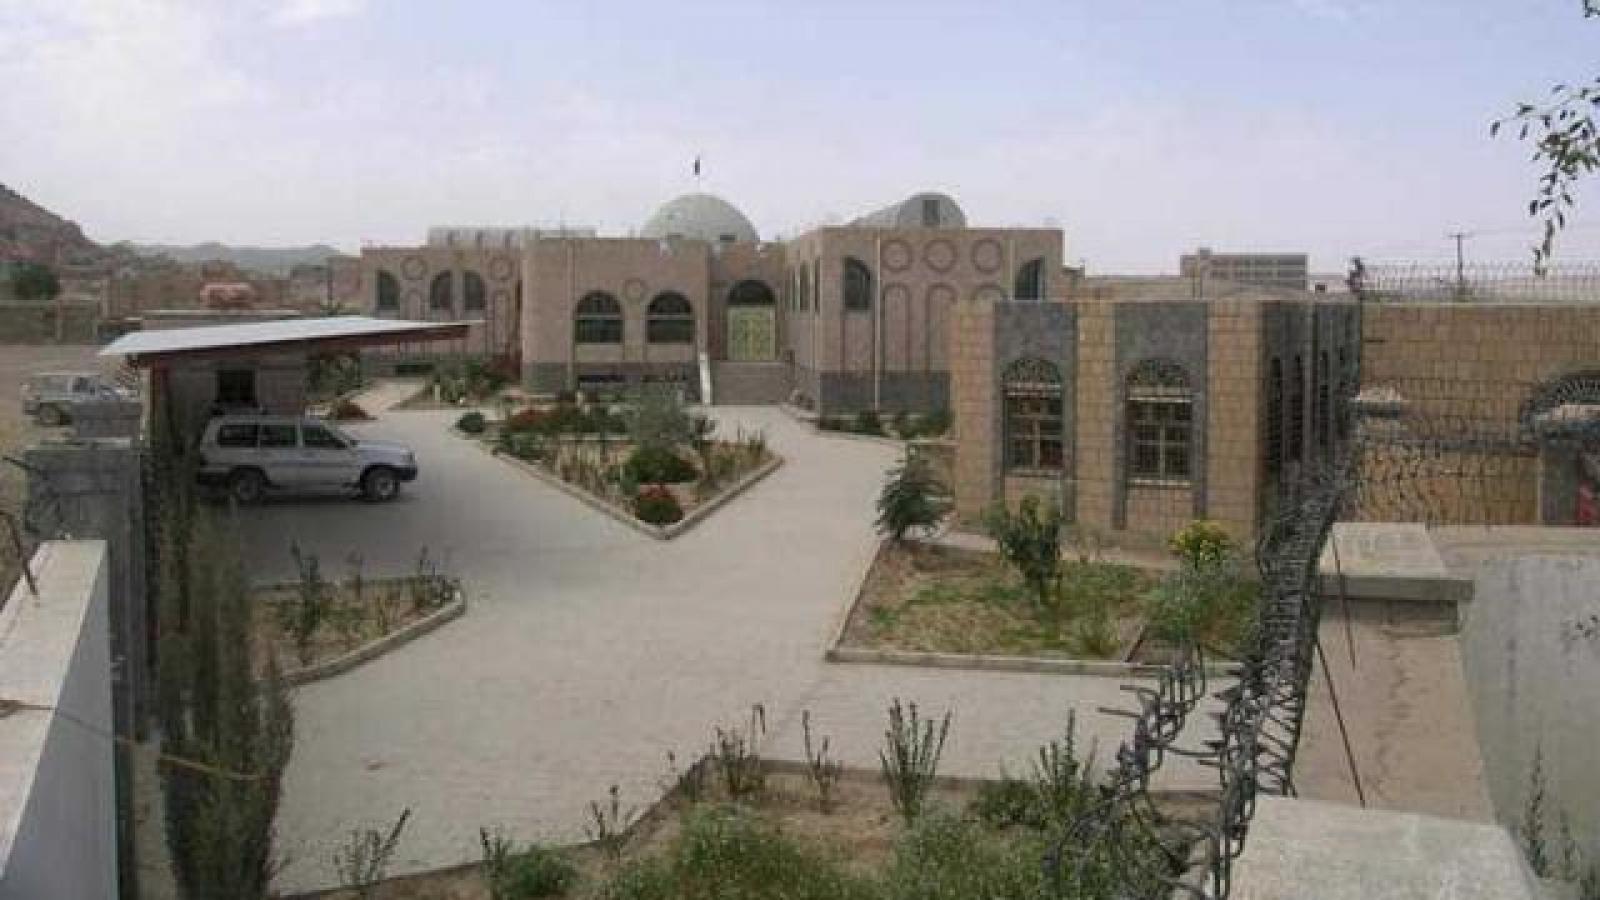 New Museum in Baynun, which was recently built to collect all of the antiquities discovered in the Baynun historical area, the New Yemenite Website, 27 January 2019